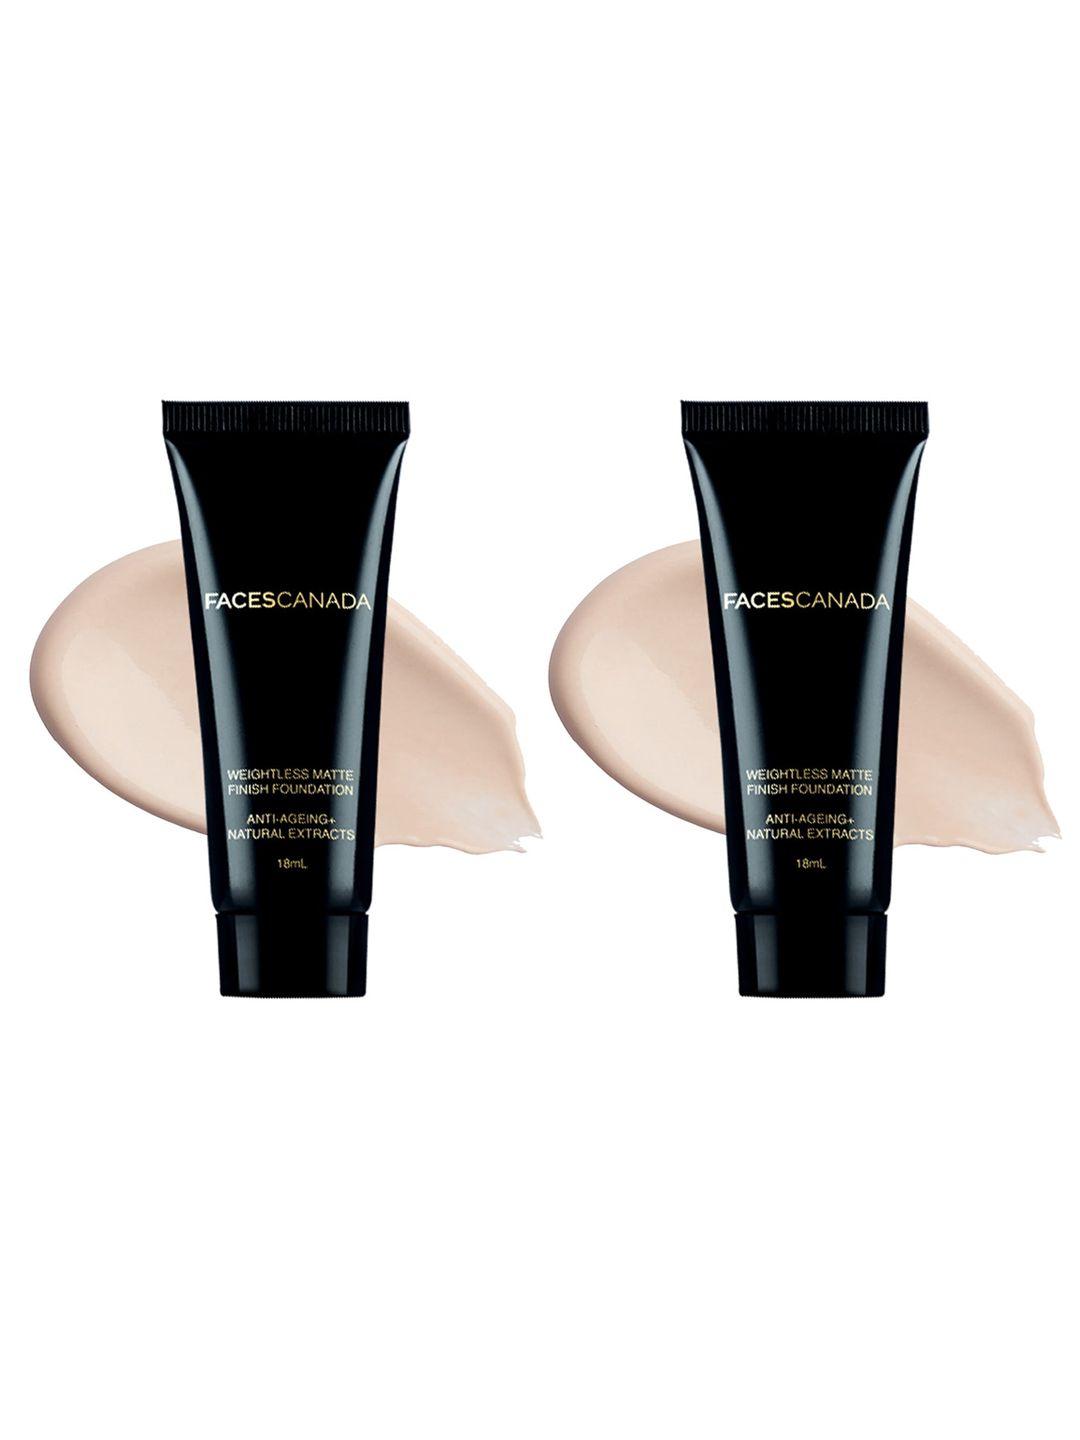 faces canada set of 2 weightless matte finish foundation 18ml each - ivory 01